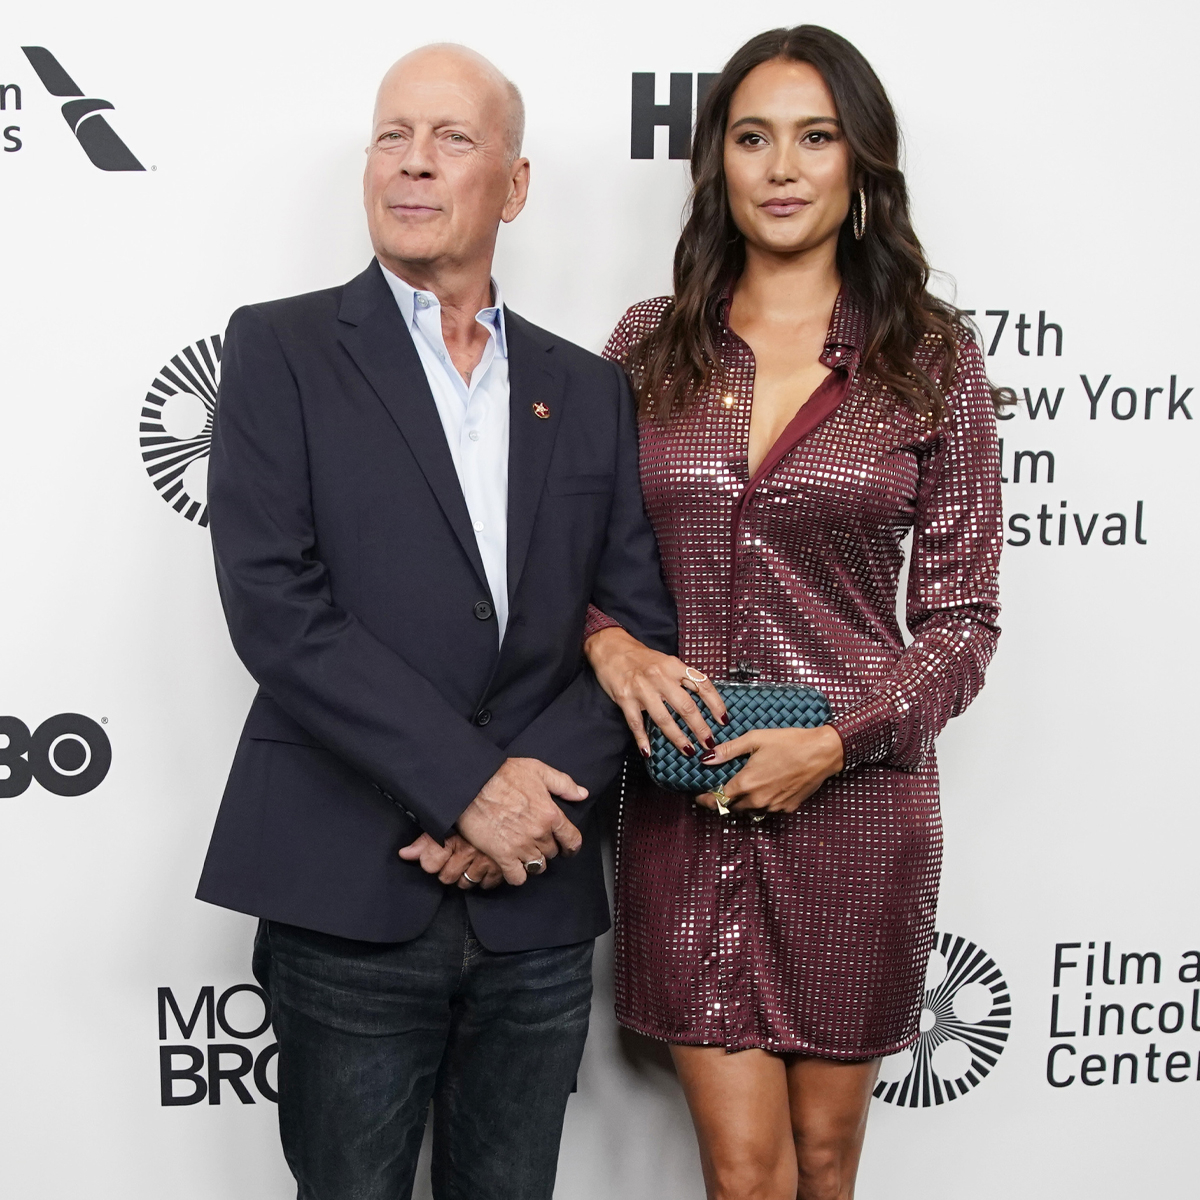 Bruce Willis’ Wife Emma Says Family Needs Have “Taken a Toll” on Her